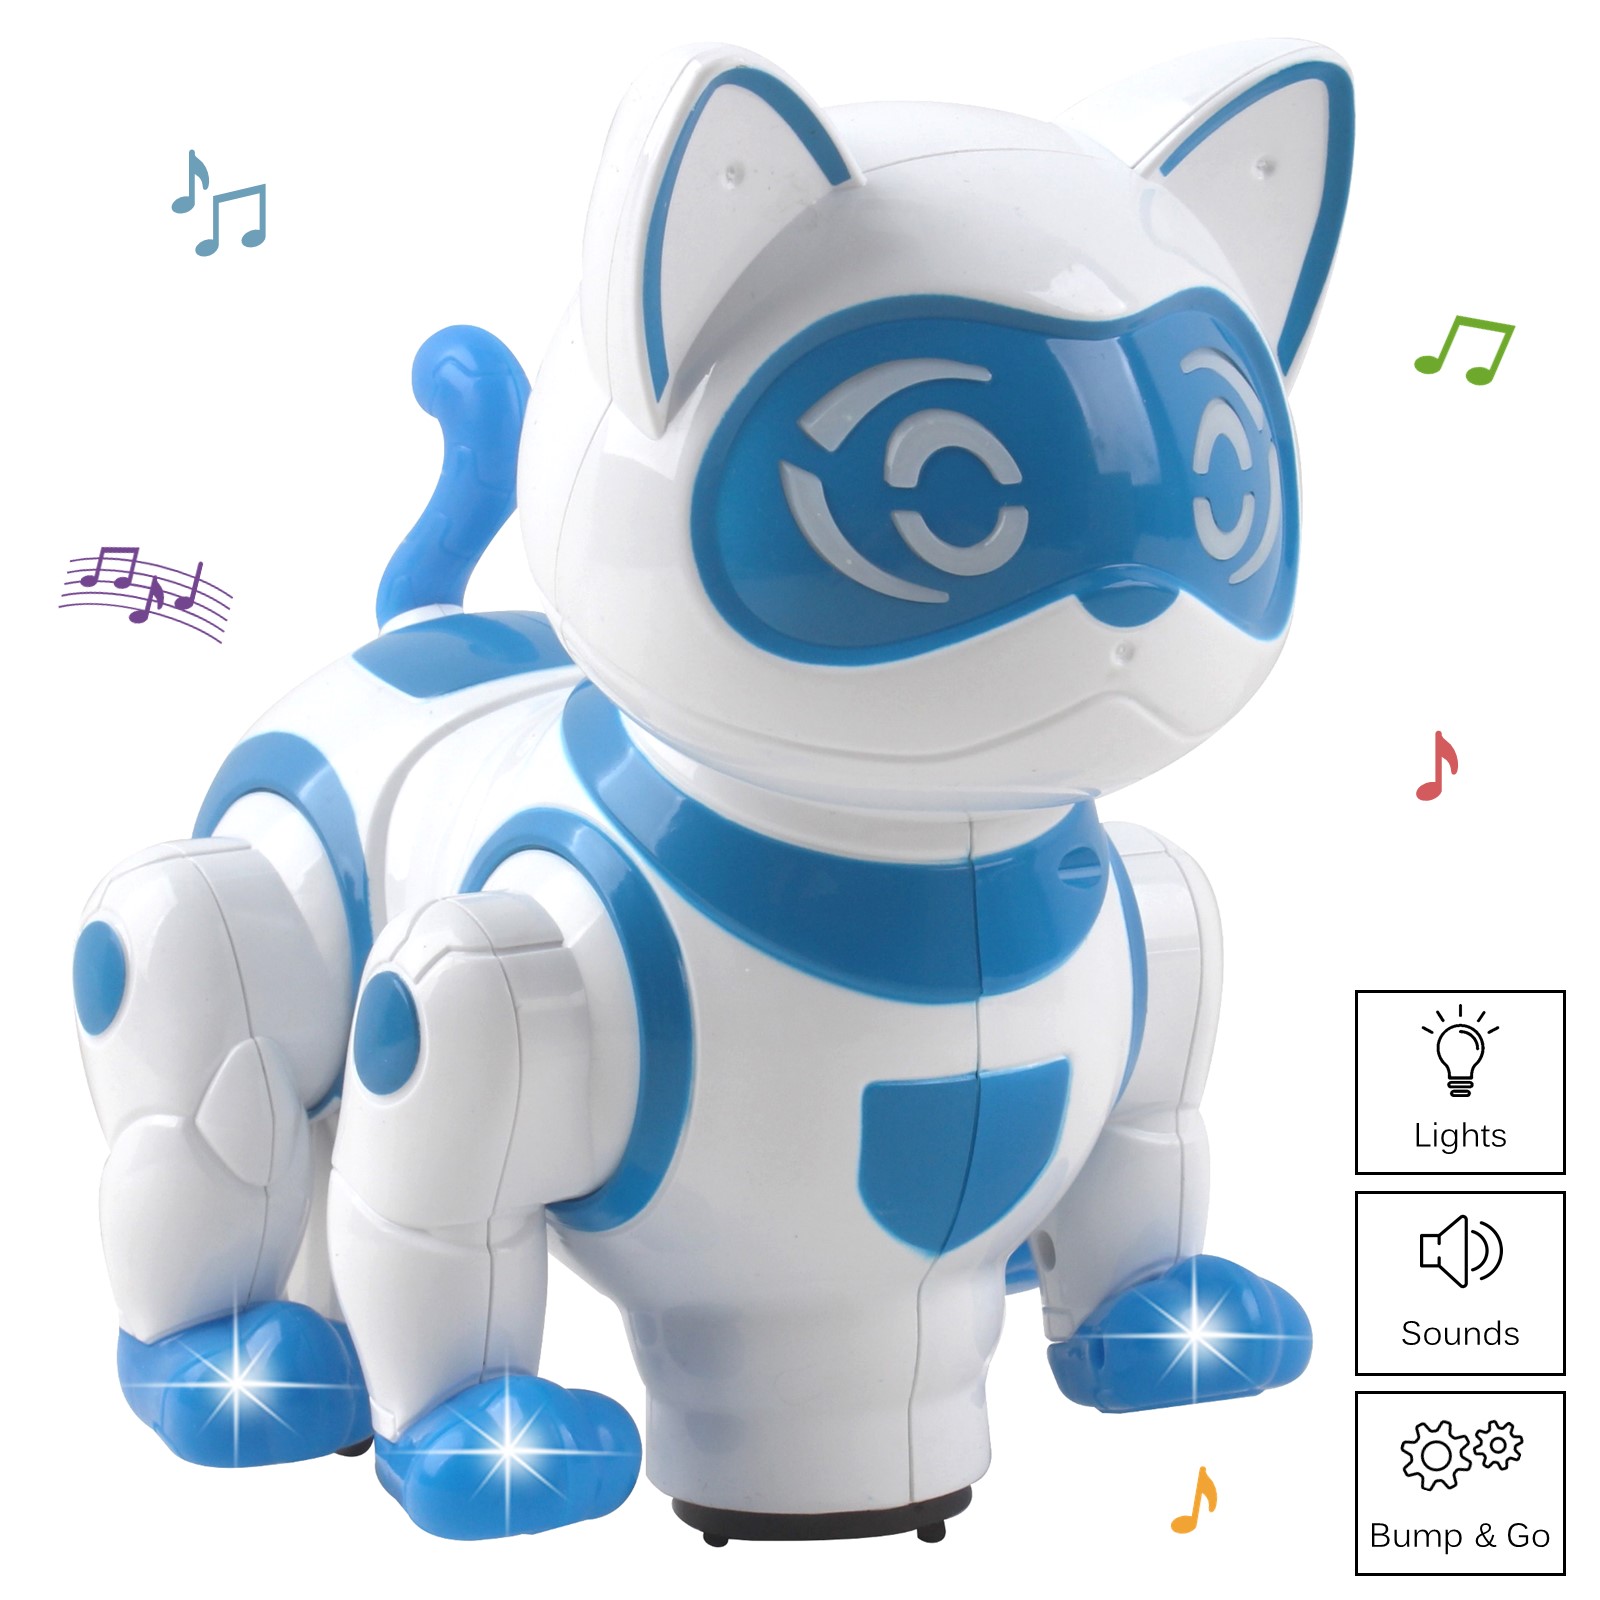 Vokodo Pet Robotic Dance Cat Interactive Kids Toy Kitty Walks Meows Sits With Lights And Music Friendly Electronic Robot Companion Bump And Go Action Play Great For Preschool Children Boy Girl Toddler TD-31